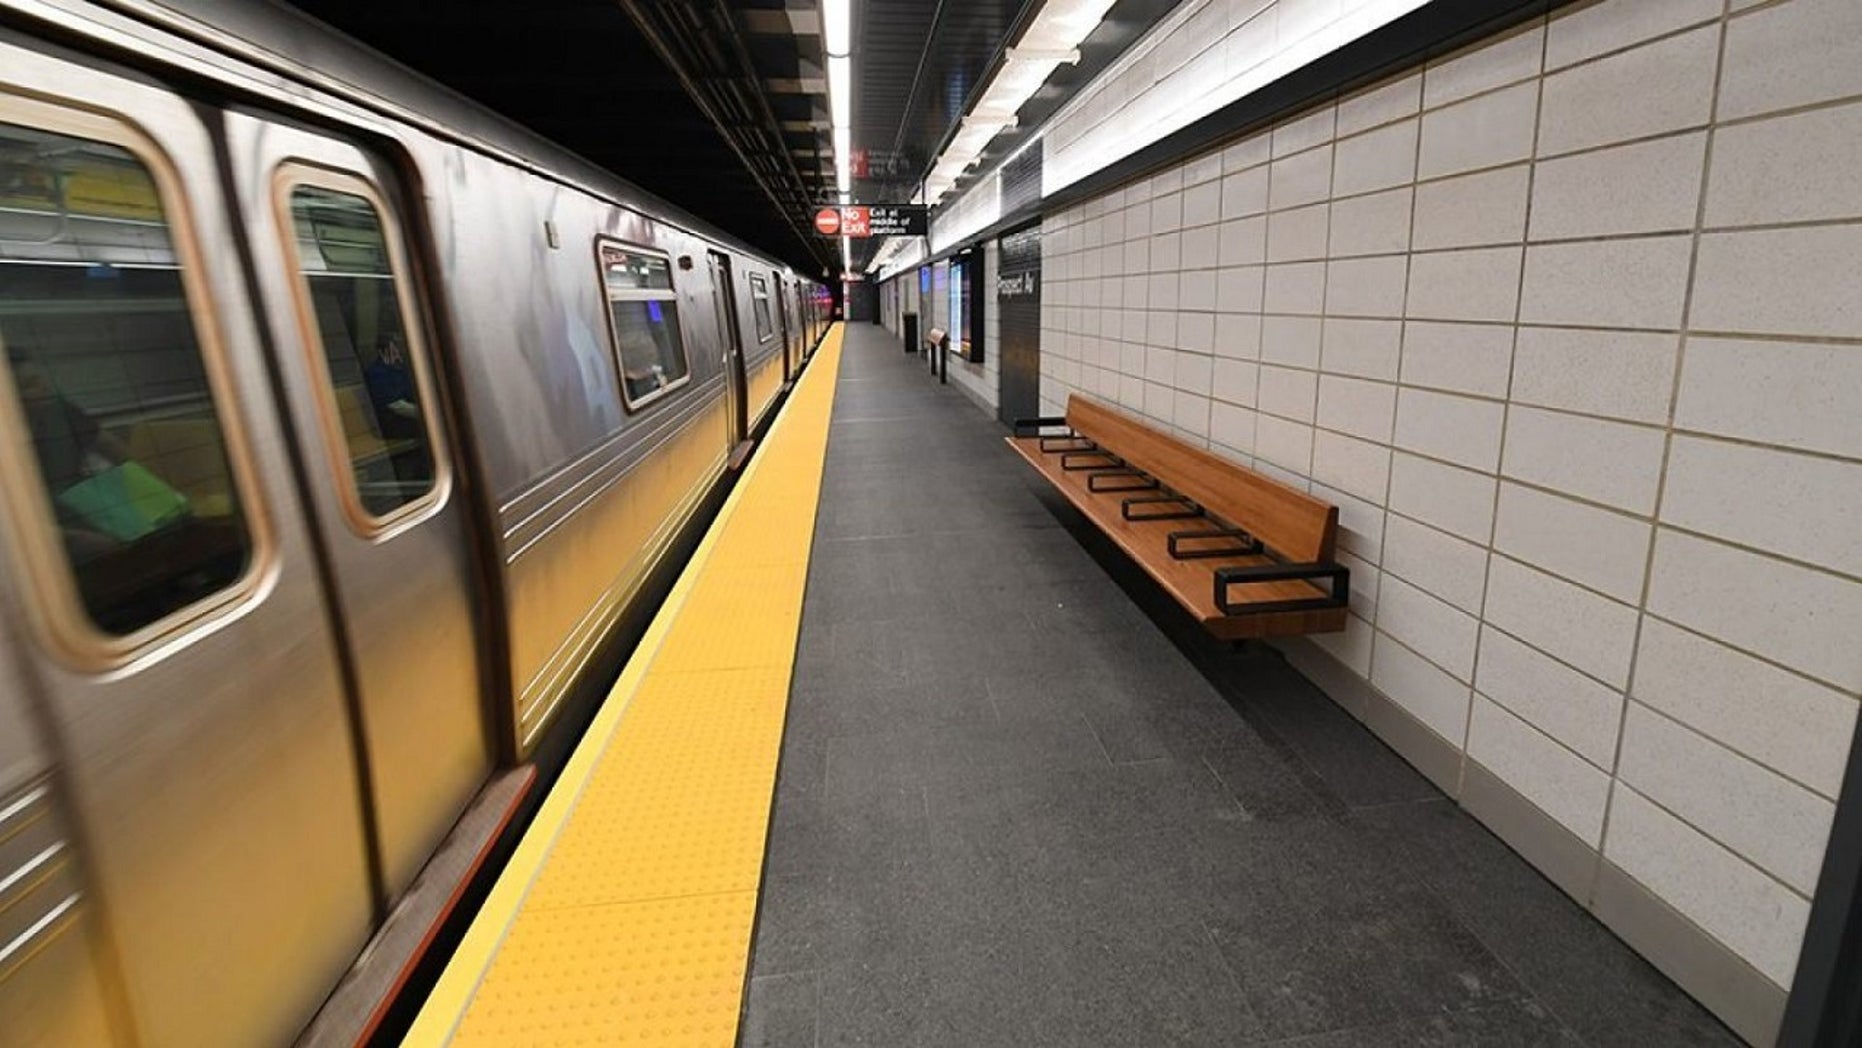 Woman reunited with $10G she lost on New York City subway